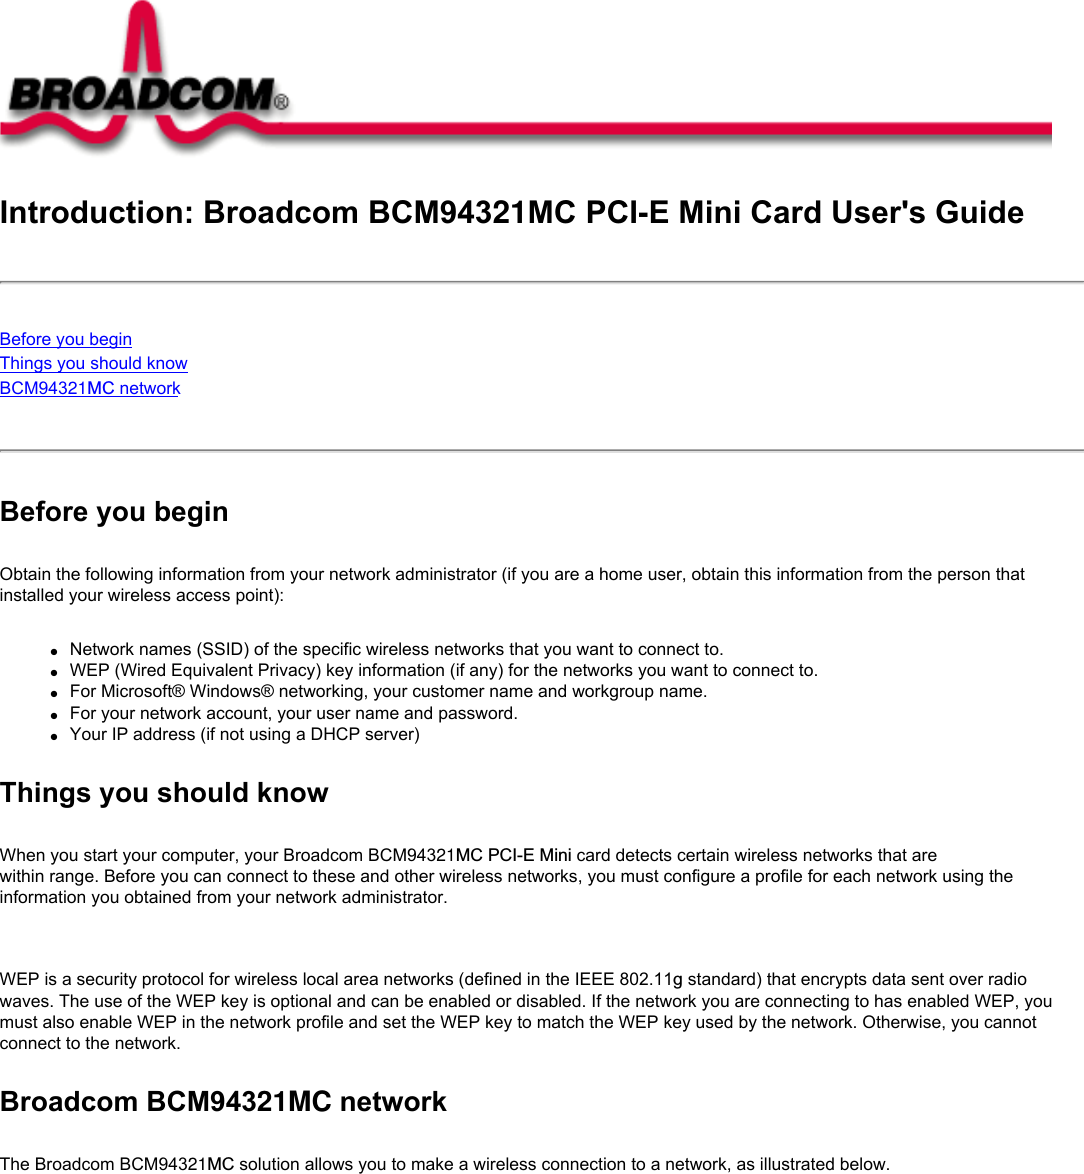 Introduction: Broadcom BCM94321MC PCI-E Mini Card User&apos;s GuideBefore you beginThings you should knowBCM94321MC network Before you beginObtain the following information from your network administrator (if you are a home user, obtain this information from the person that installed your wireless access point):●     Network names (SSID) of the specific wireless networks that you want to connect to.●     WEP (Wired Equivalent Privacy) key information (if any) for the networks you want to connect to.●     For Microsoft® Windows® networking, your customer name and workgroup name.●     For your network account, your user name and password.●     Your IP address (if not using a DHCP server)Things you should knowWhen you start your computer, your Broadcom BCM94321MC PCI-E Mini card detects certain wireless networks that are within range. Before you can connect to these and other wireless networks, you must configure a profile for each network using the information you obtained from your network administrator.   WEP is a security protocol for wireless local area networks (defined in the IEEE 802.11g standard) that encrypts data sent over radio waves. The use of the WEP key is optional and can be enabled or disabled. If the network you are connecting to has enabled WEP, you must also enable WEP in the network profile and set the WEP key to match the WEP key used by the network. Otherwise, you cannot connect to the network.Broadcom BCM94321MC networkThe Broadcom BCM94321MC solution allows you to make a wireless connection to a network, as illustrated below.